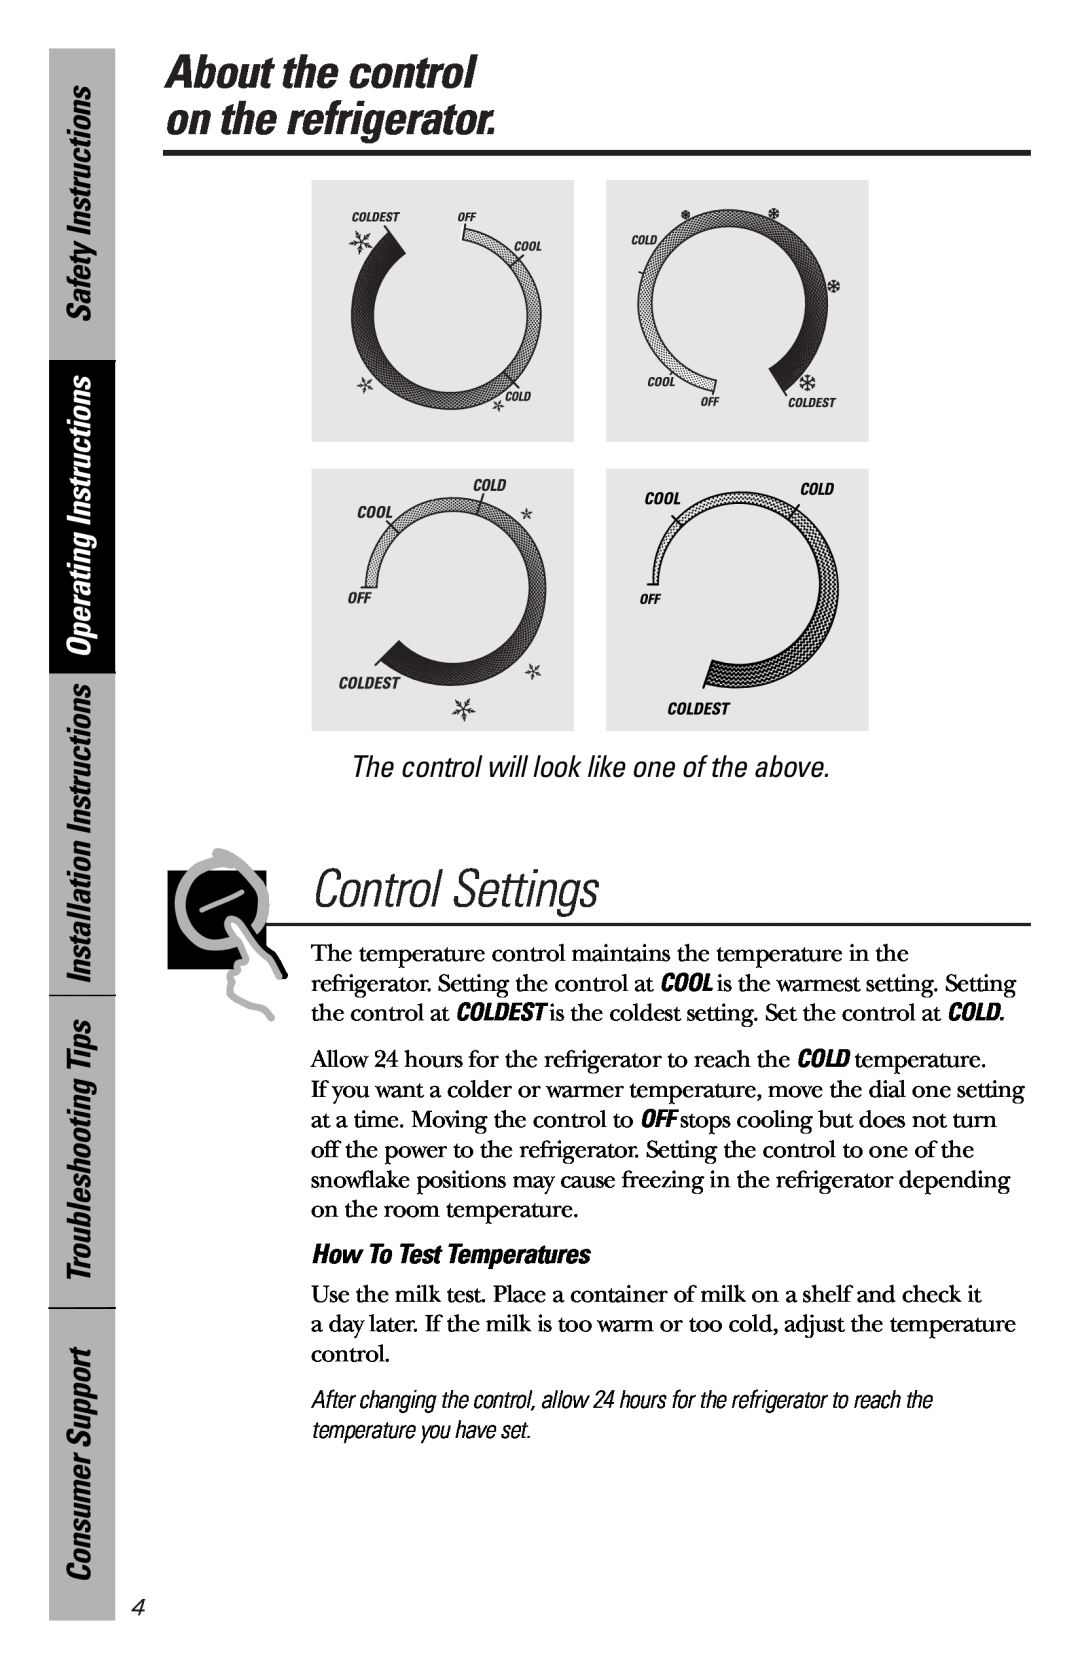 GE 162D9639P009 Control Settings, About the control on the refrigerator, The control will look like one of the above 